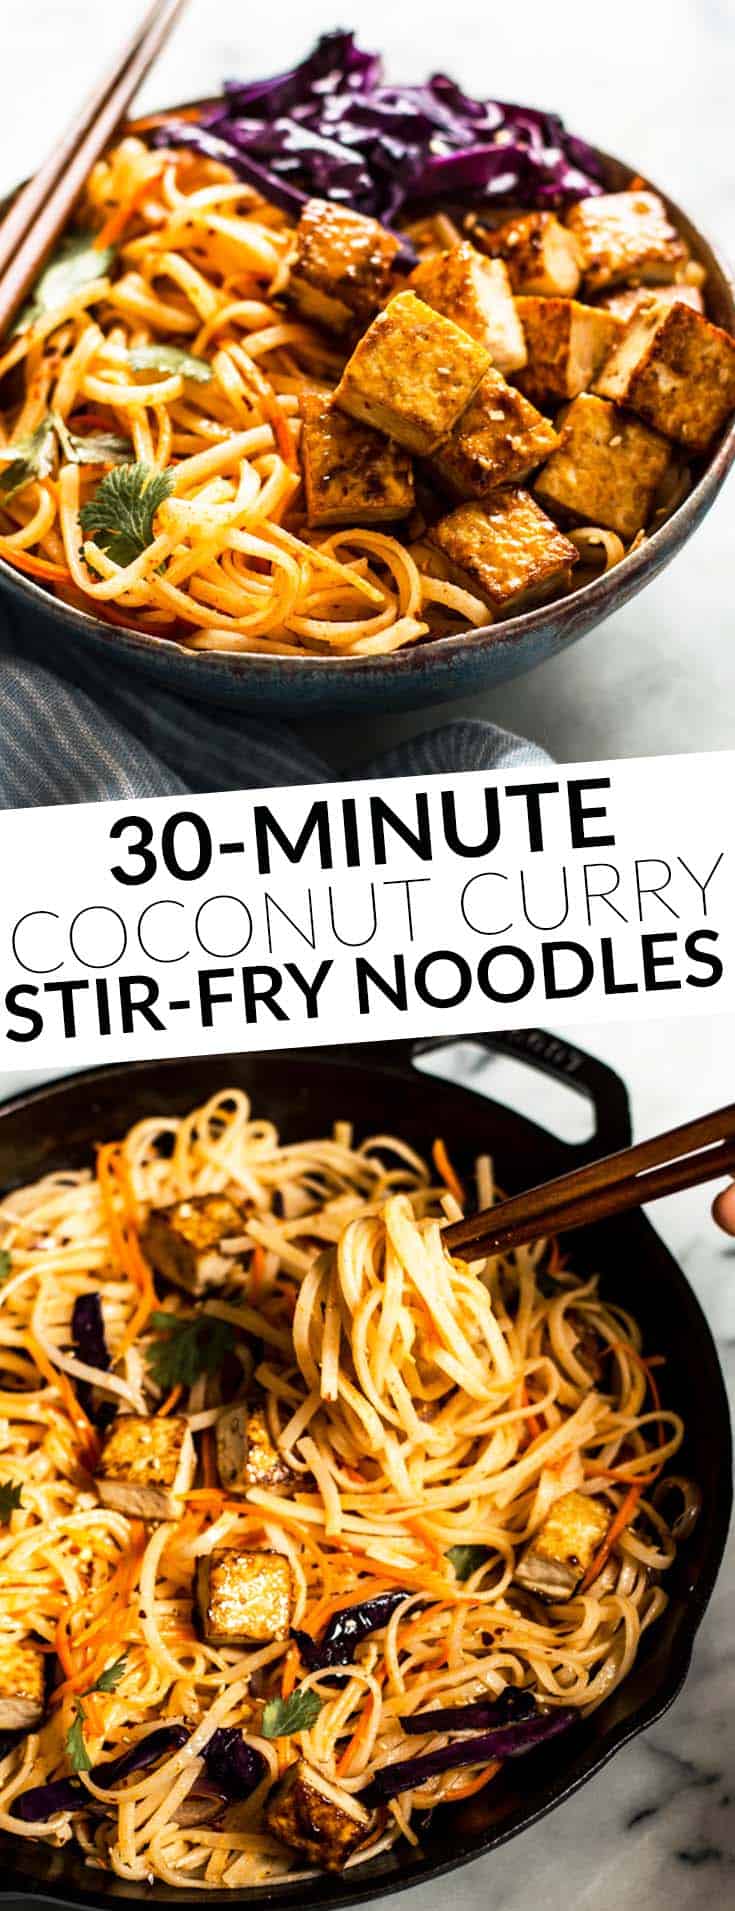 30-Minute Coconut Curry Stir Fry Noodles with Glazed Tofu - easy weeknight gluten free and vegan meal! by @healthynibs